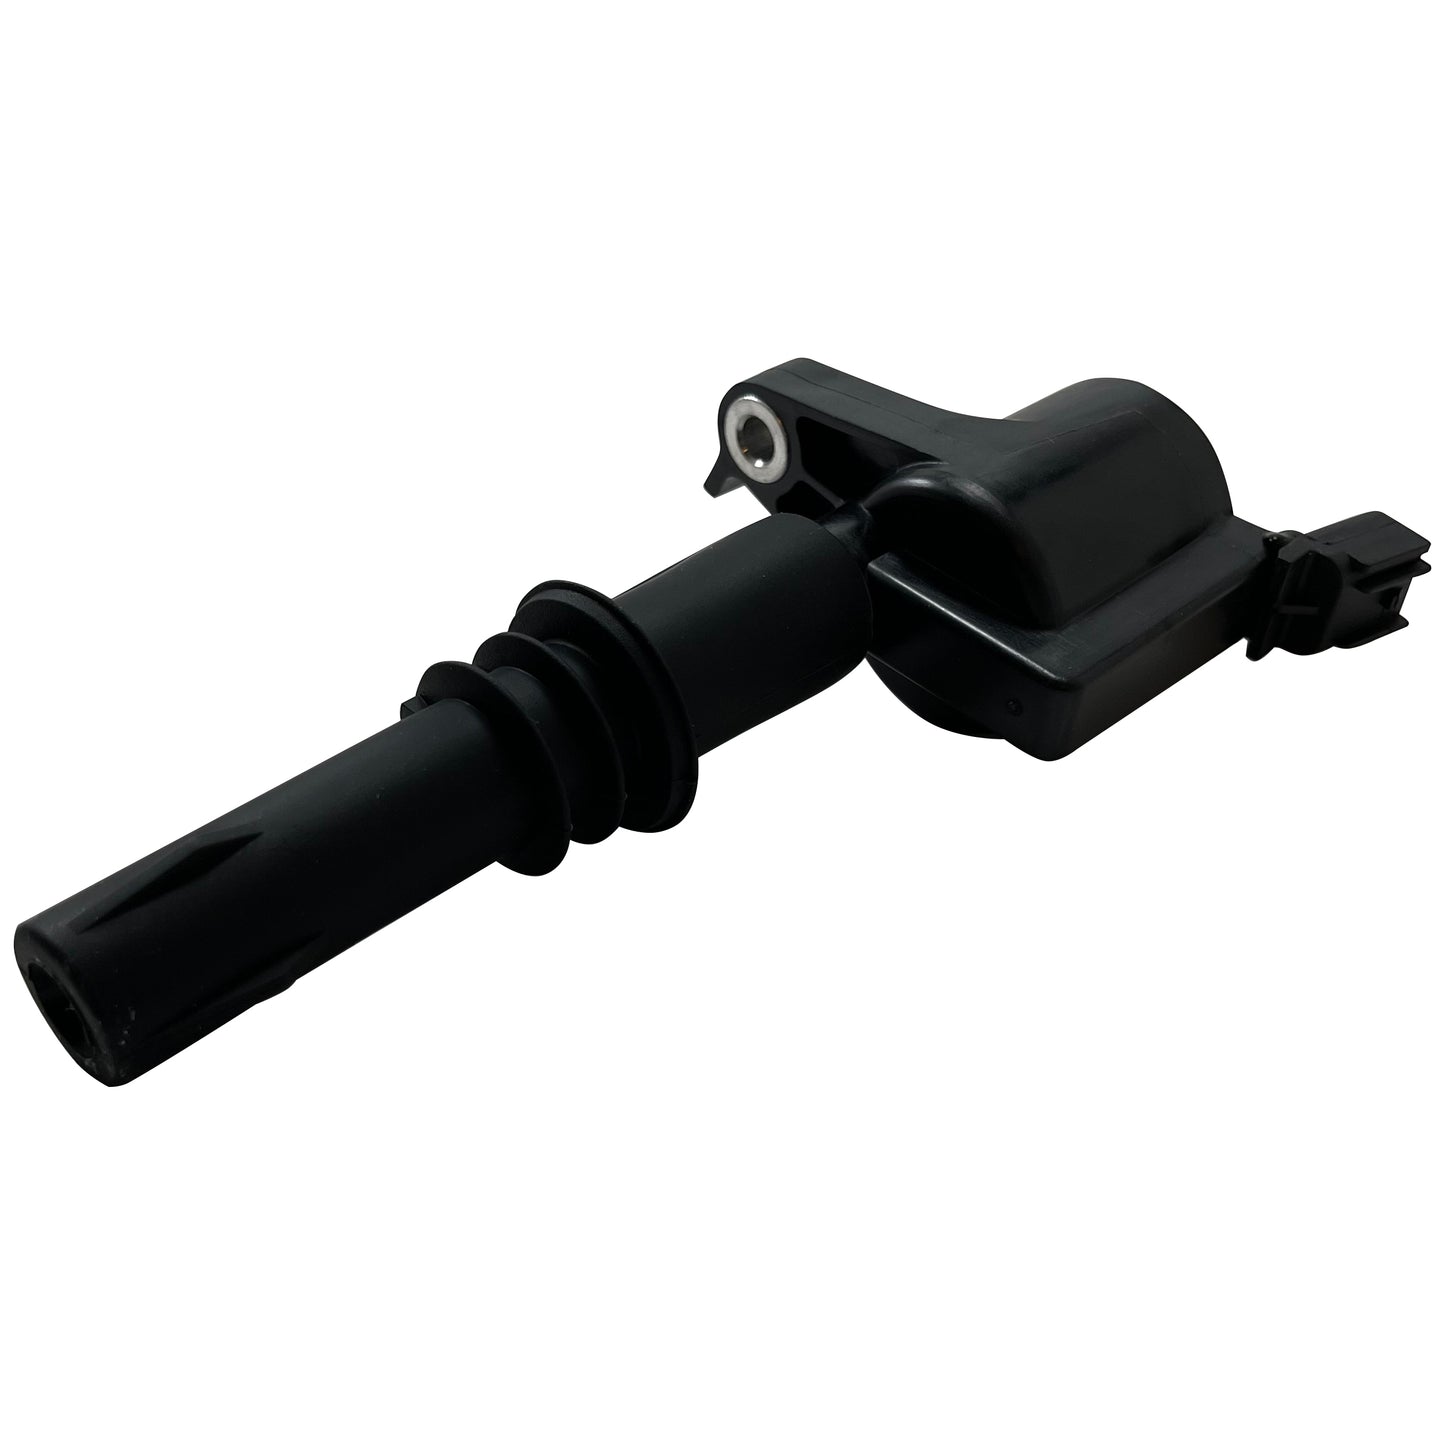 Ignition Coil Fits Ford 4.6, 5.4L 6.8L 2005 - 2009, Repl SMP# FD508 NAPA IC617